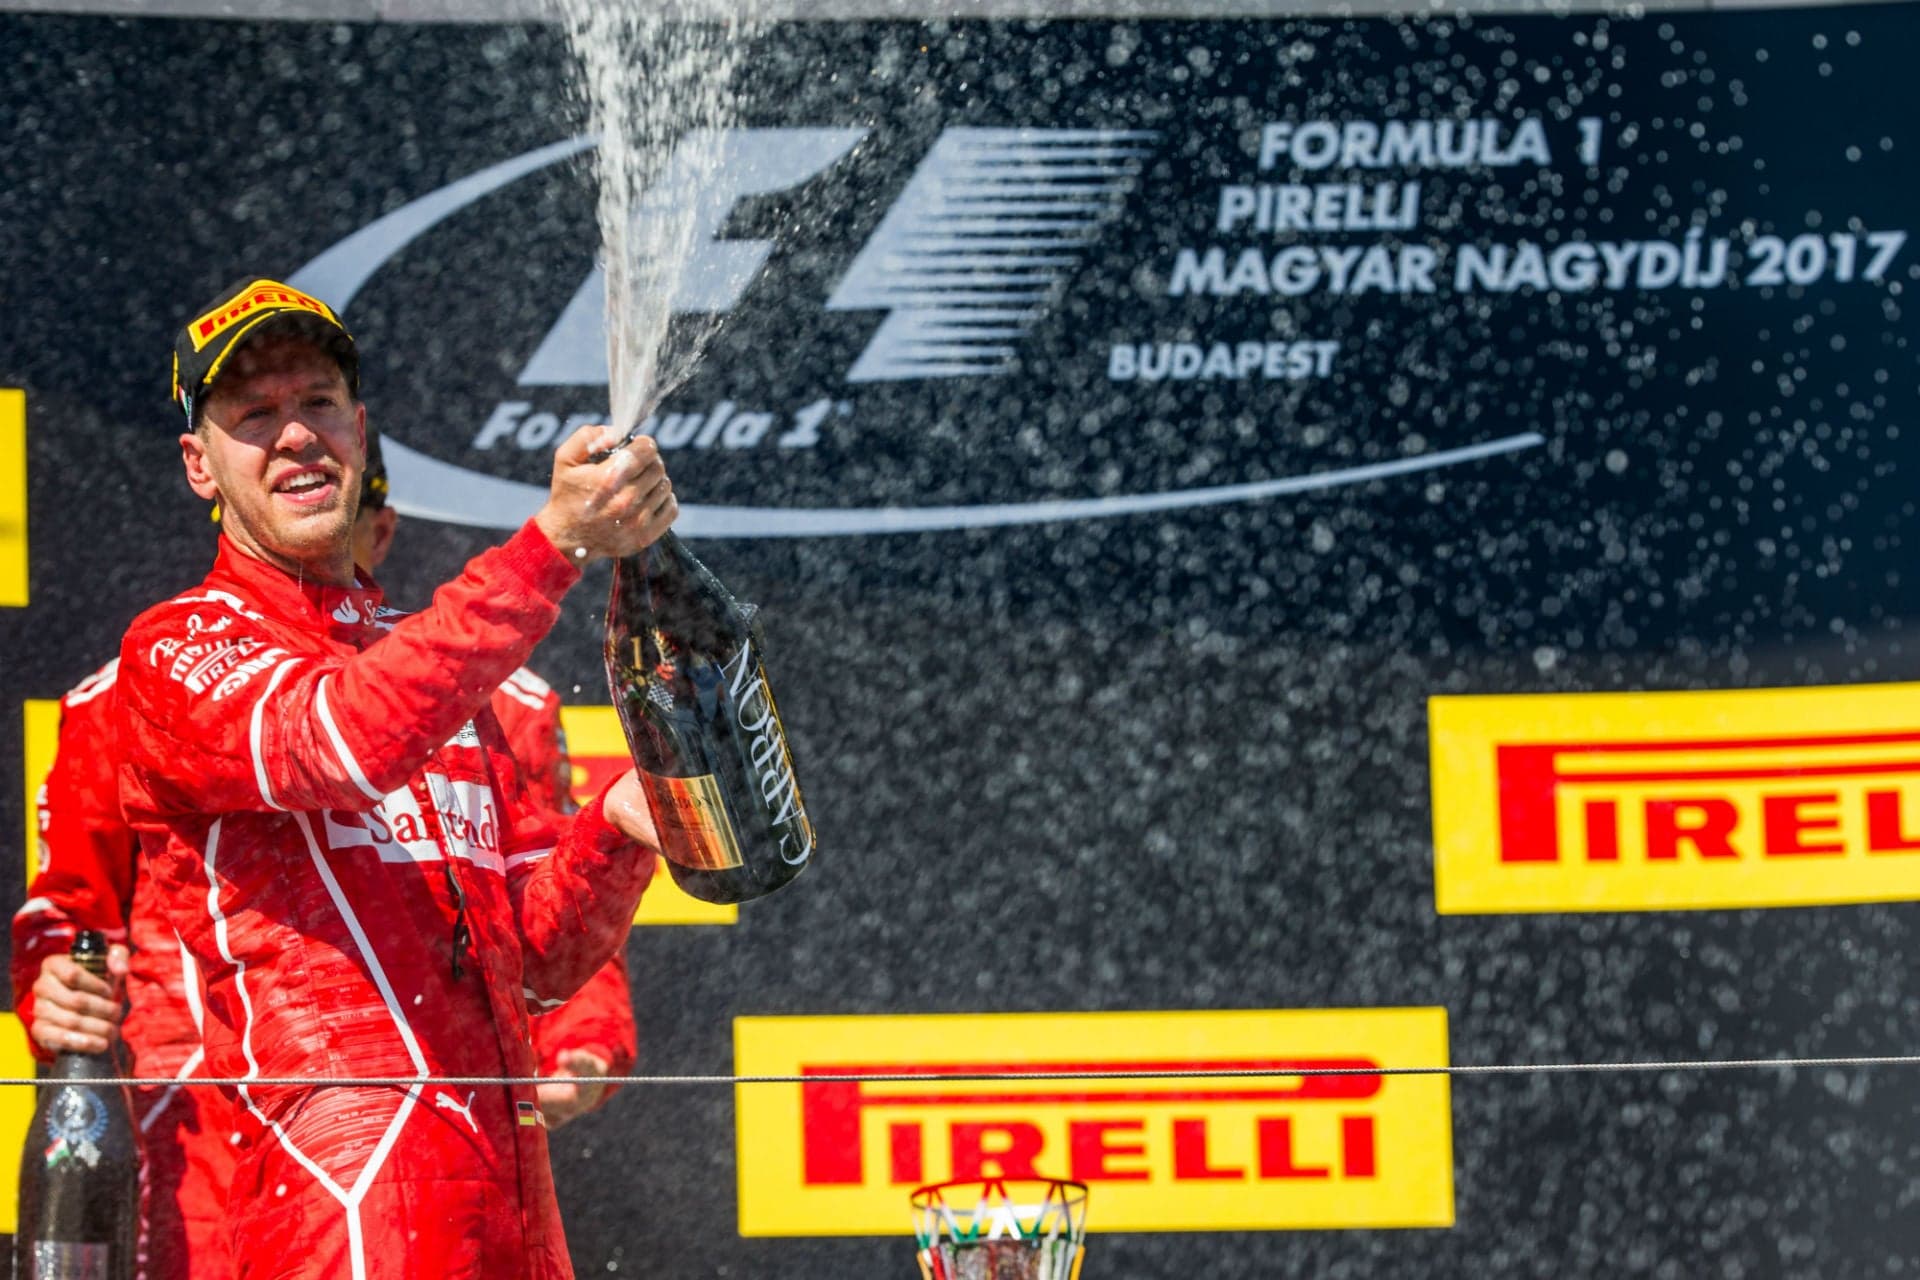 Vettel Claims Hungarian Grand Prix Victory Amidst Team Order Frenzy